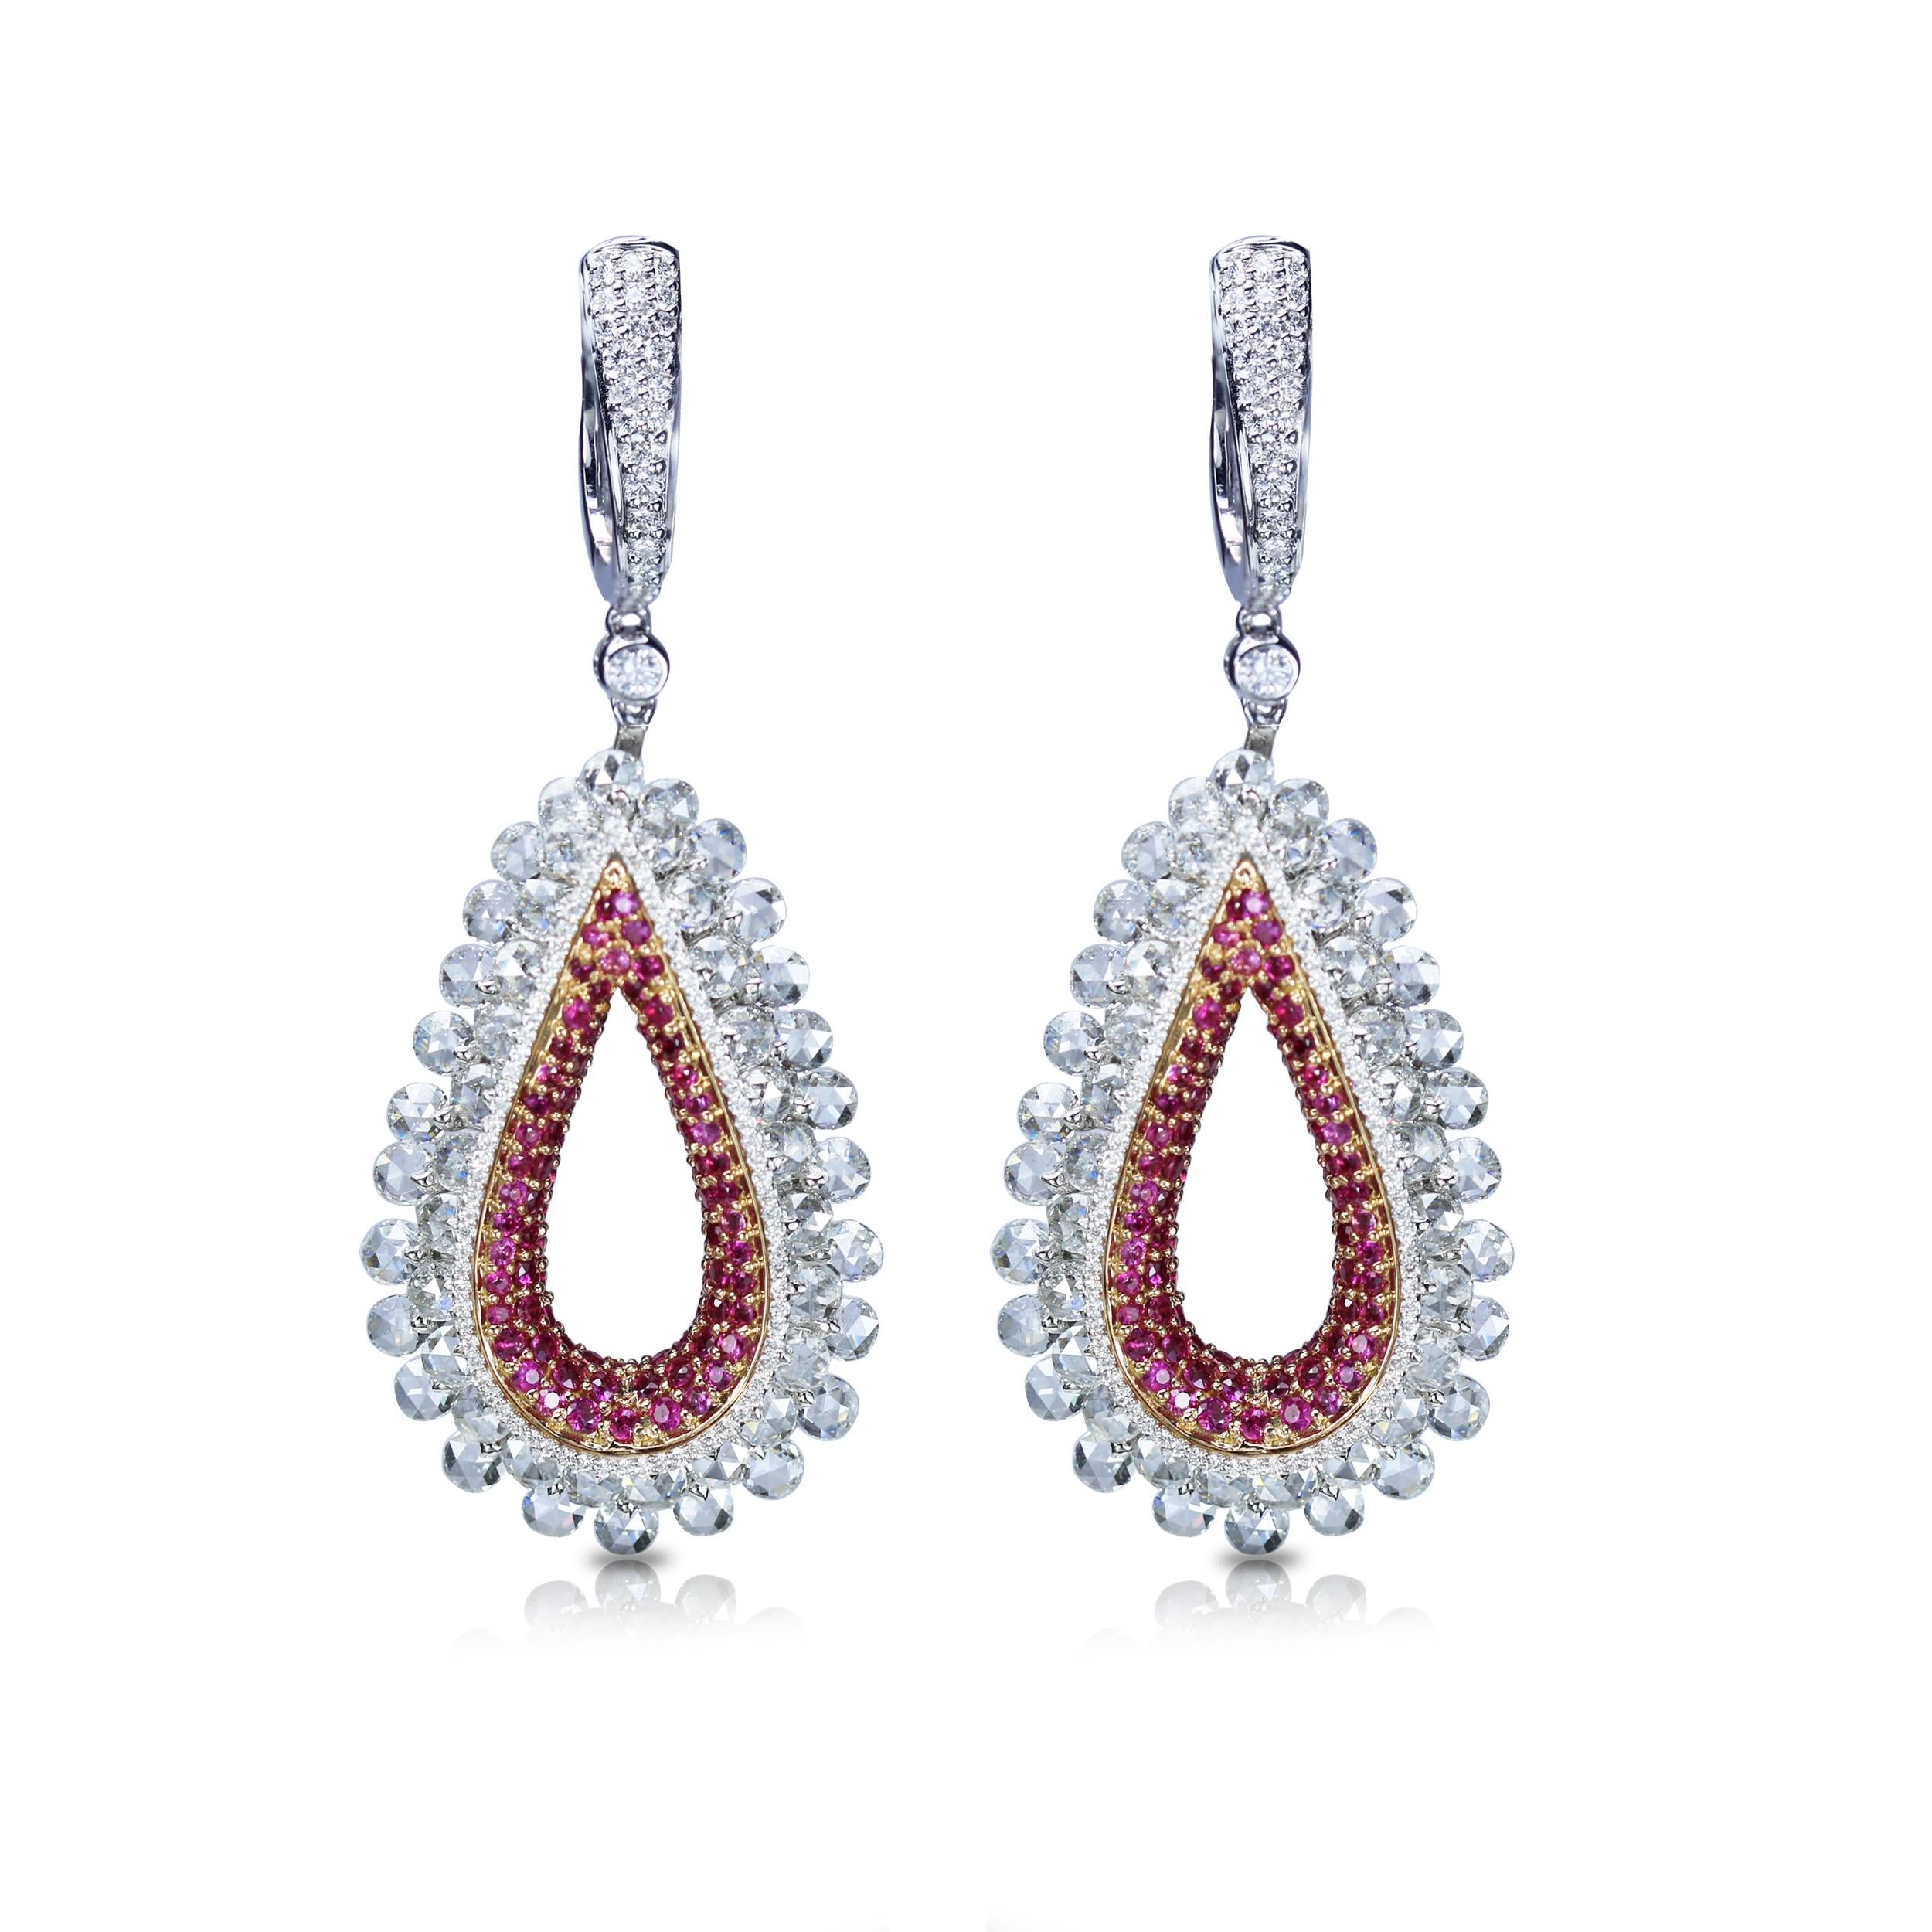 F-G/ VVS-VS-SI brilliant cut and rosecut diamond and pink sapphire earrings

This teardrop-shaped pair of 18K white gold and rose gold earrings featuring F-G/ VVS-VS-SI brilliant cut and rosecut diamonds will become a treasured part of your jewelry